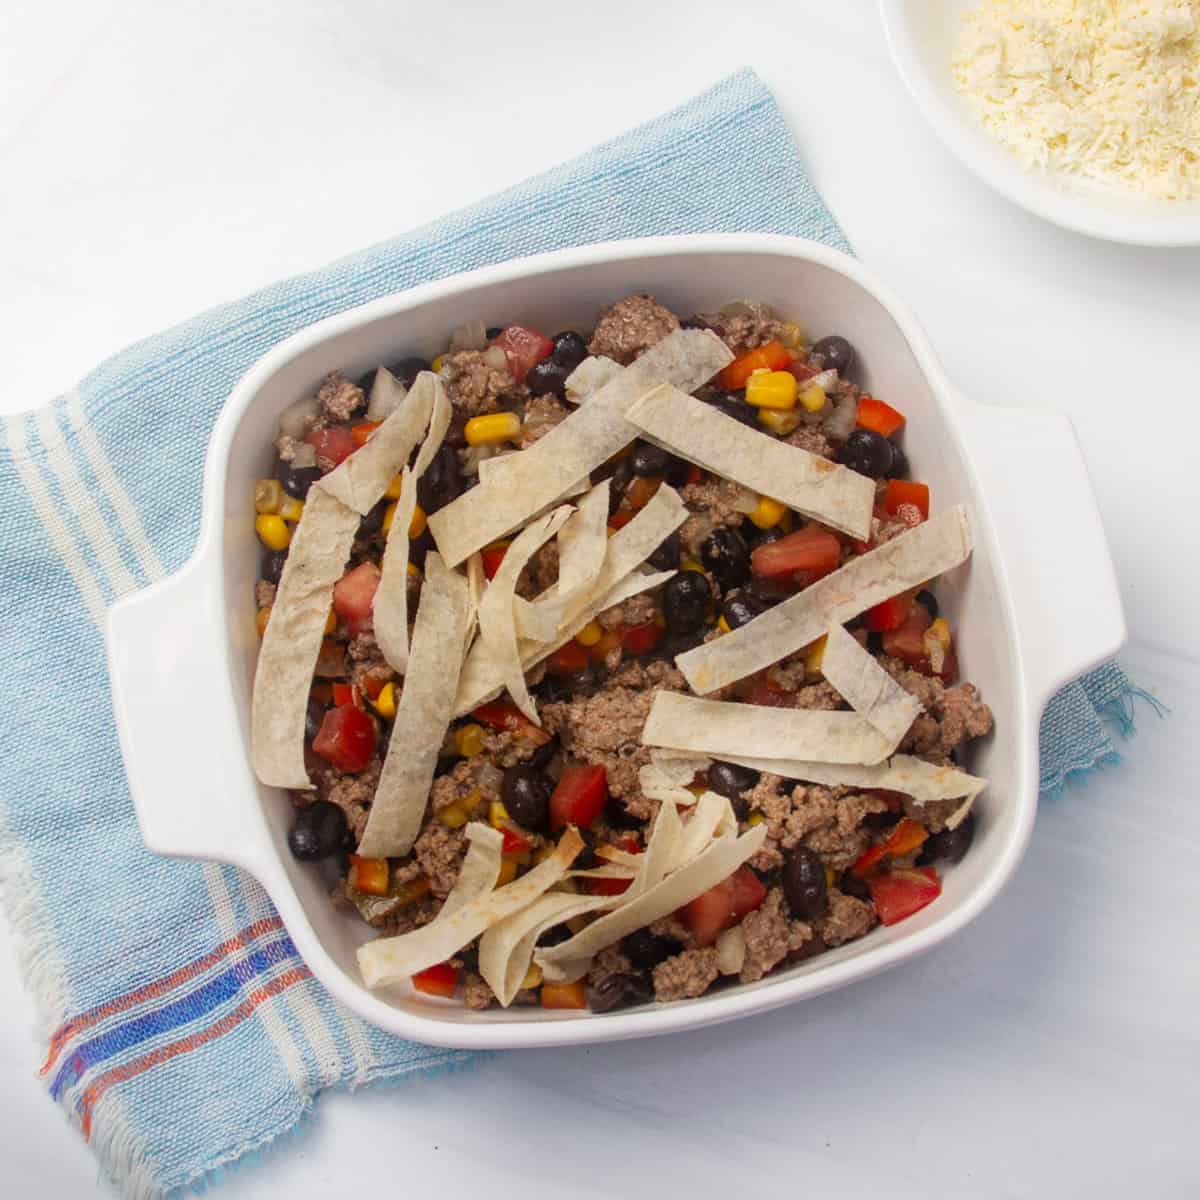 Ground beef and veggie mixture topped with tortilla strips in a baking dish.